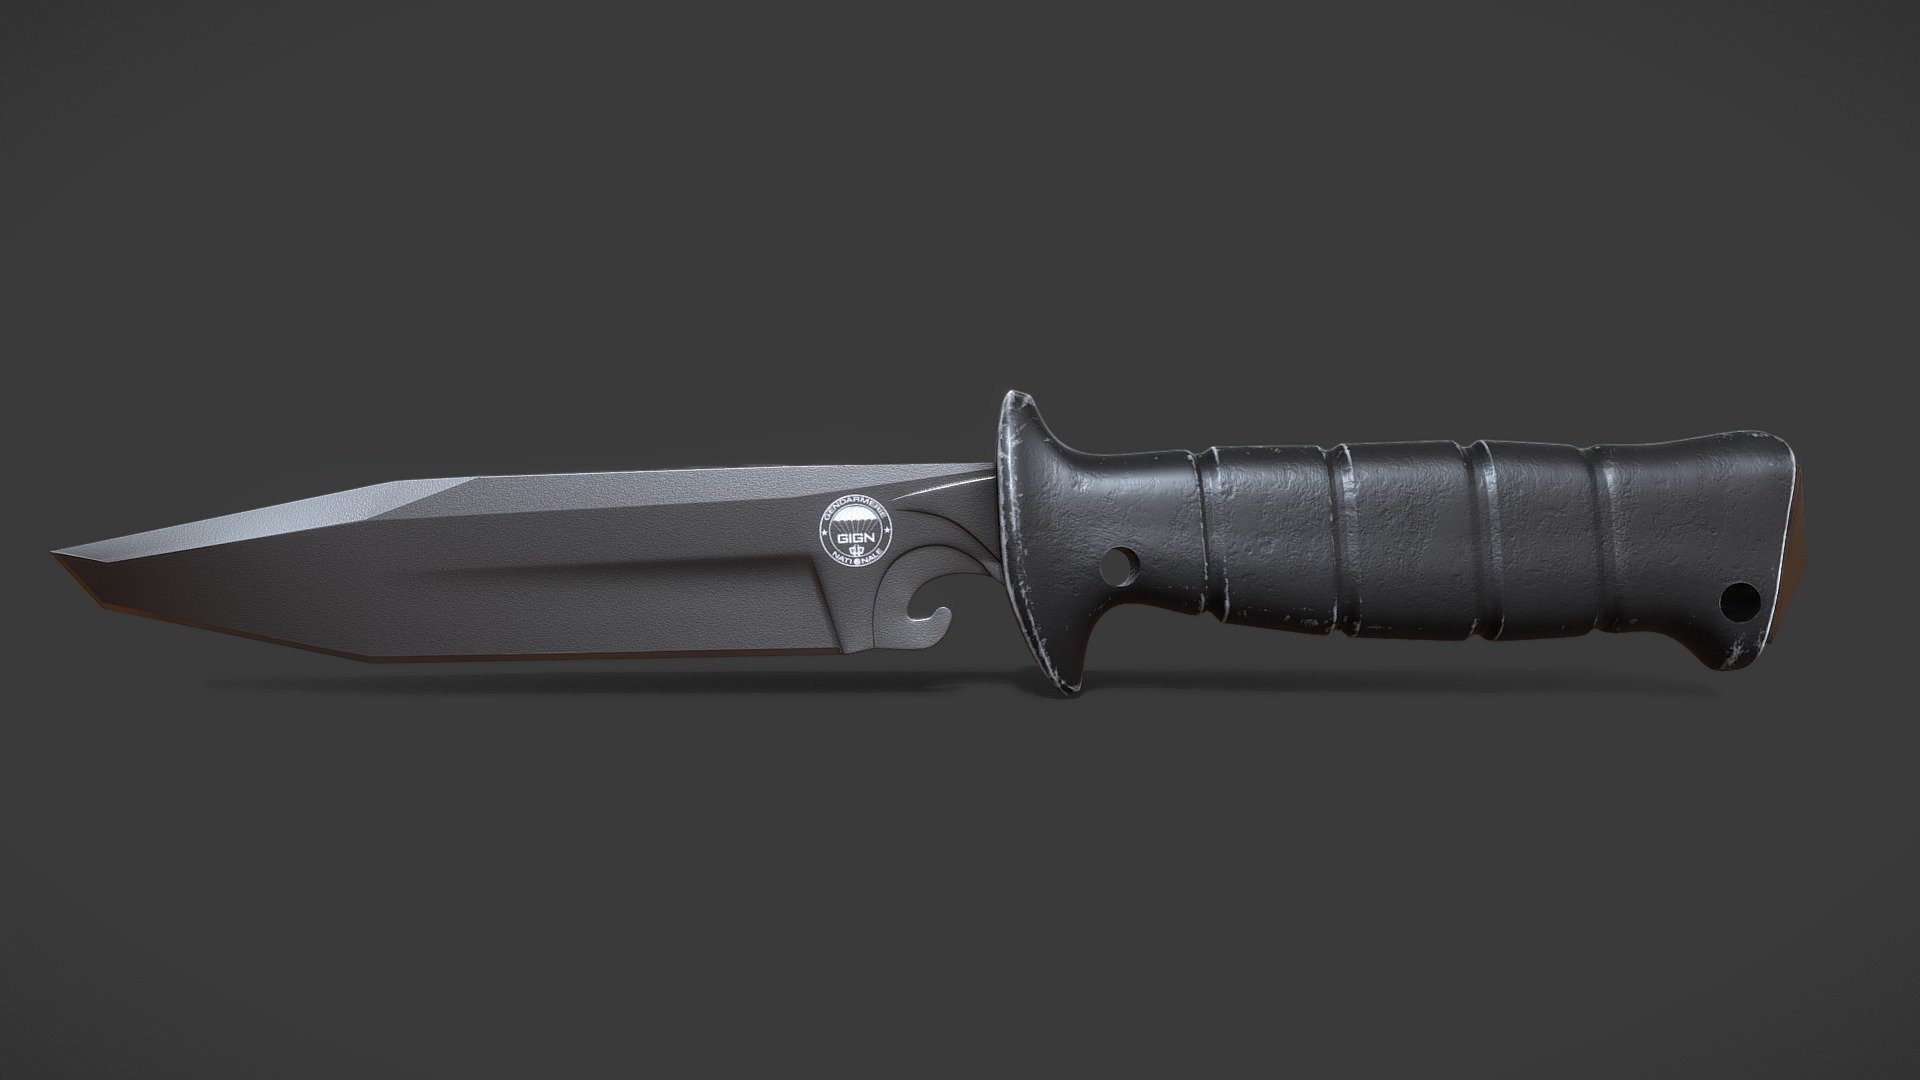 This is a GIGN knife, model is high poly like texture 4k - GIGN Knife - 4k UHD - Download Free 3D model by hidan1199 3d model